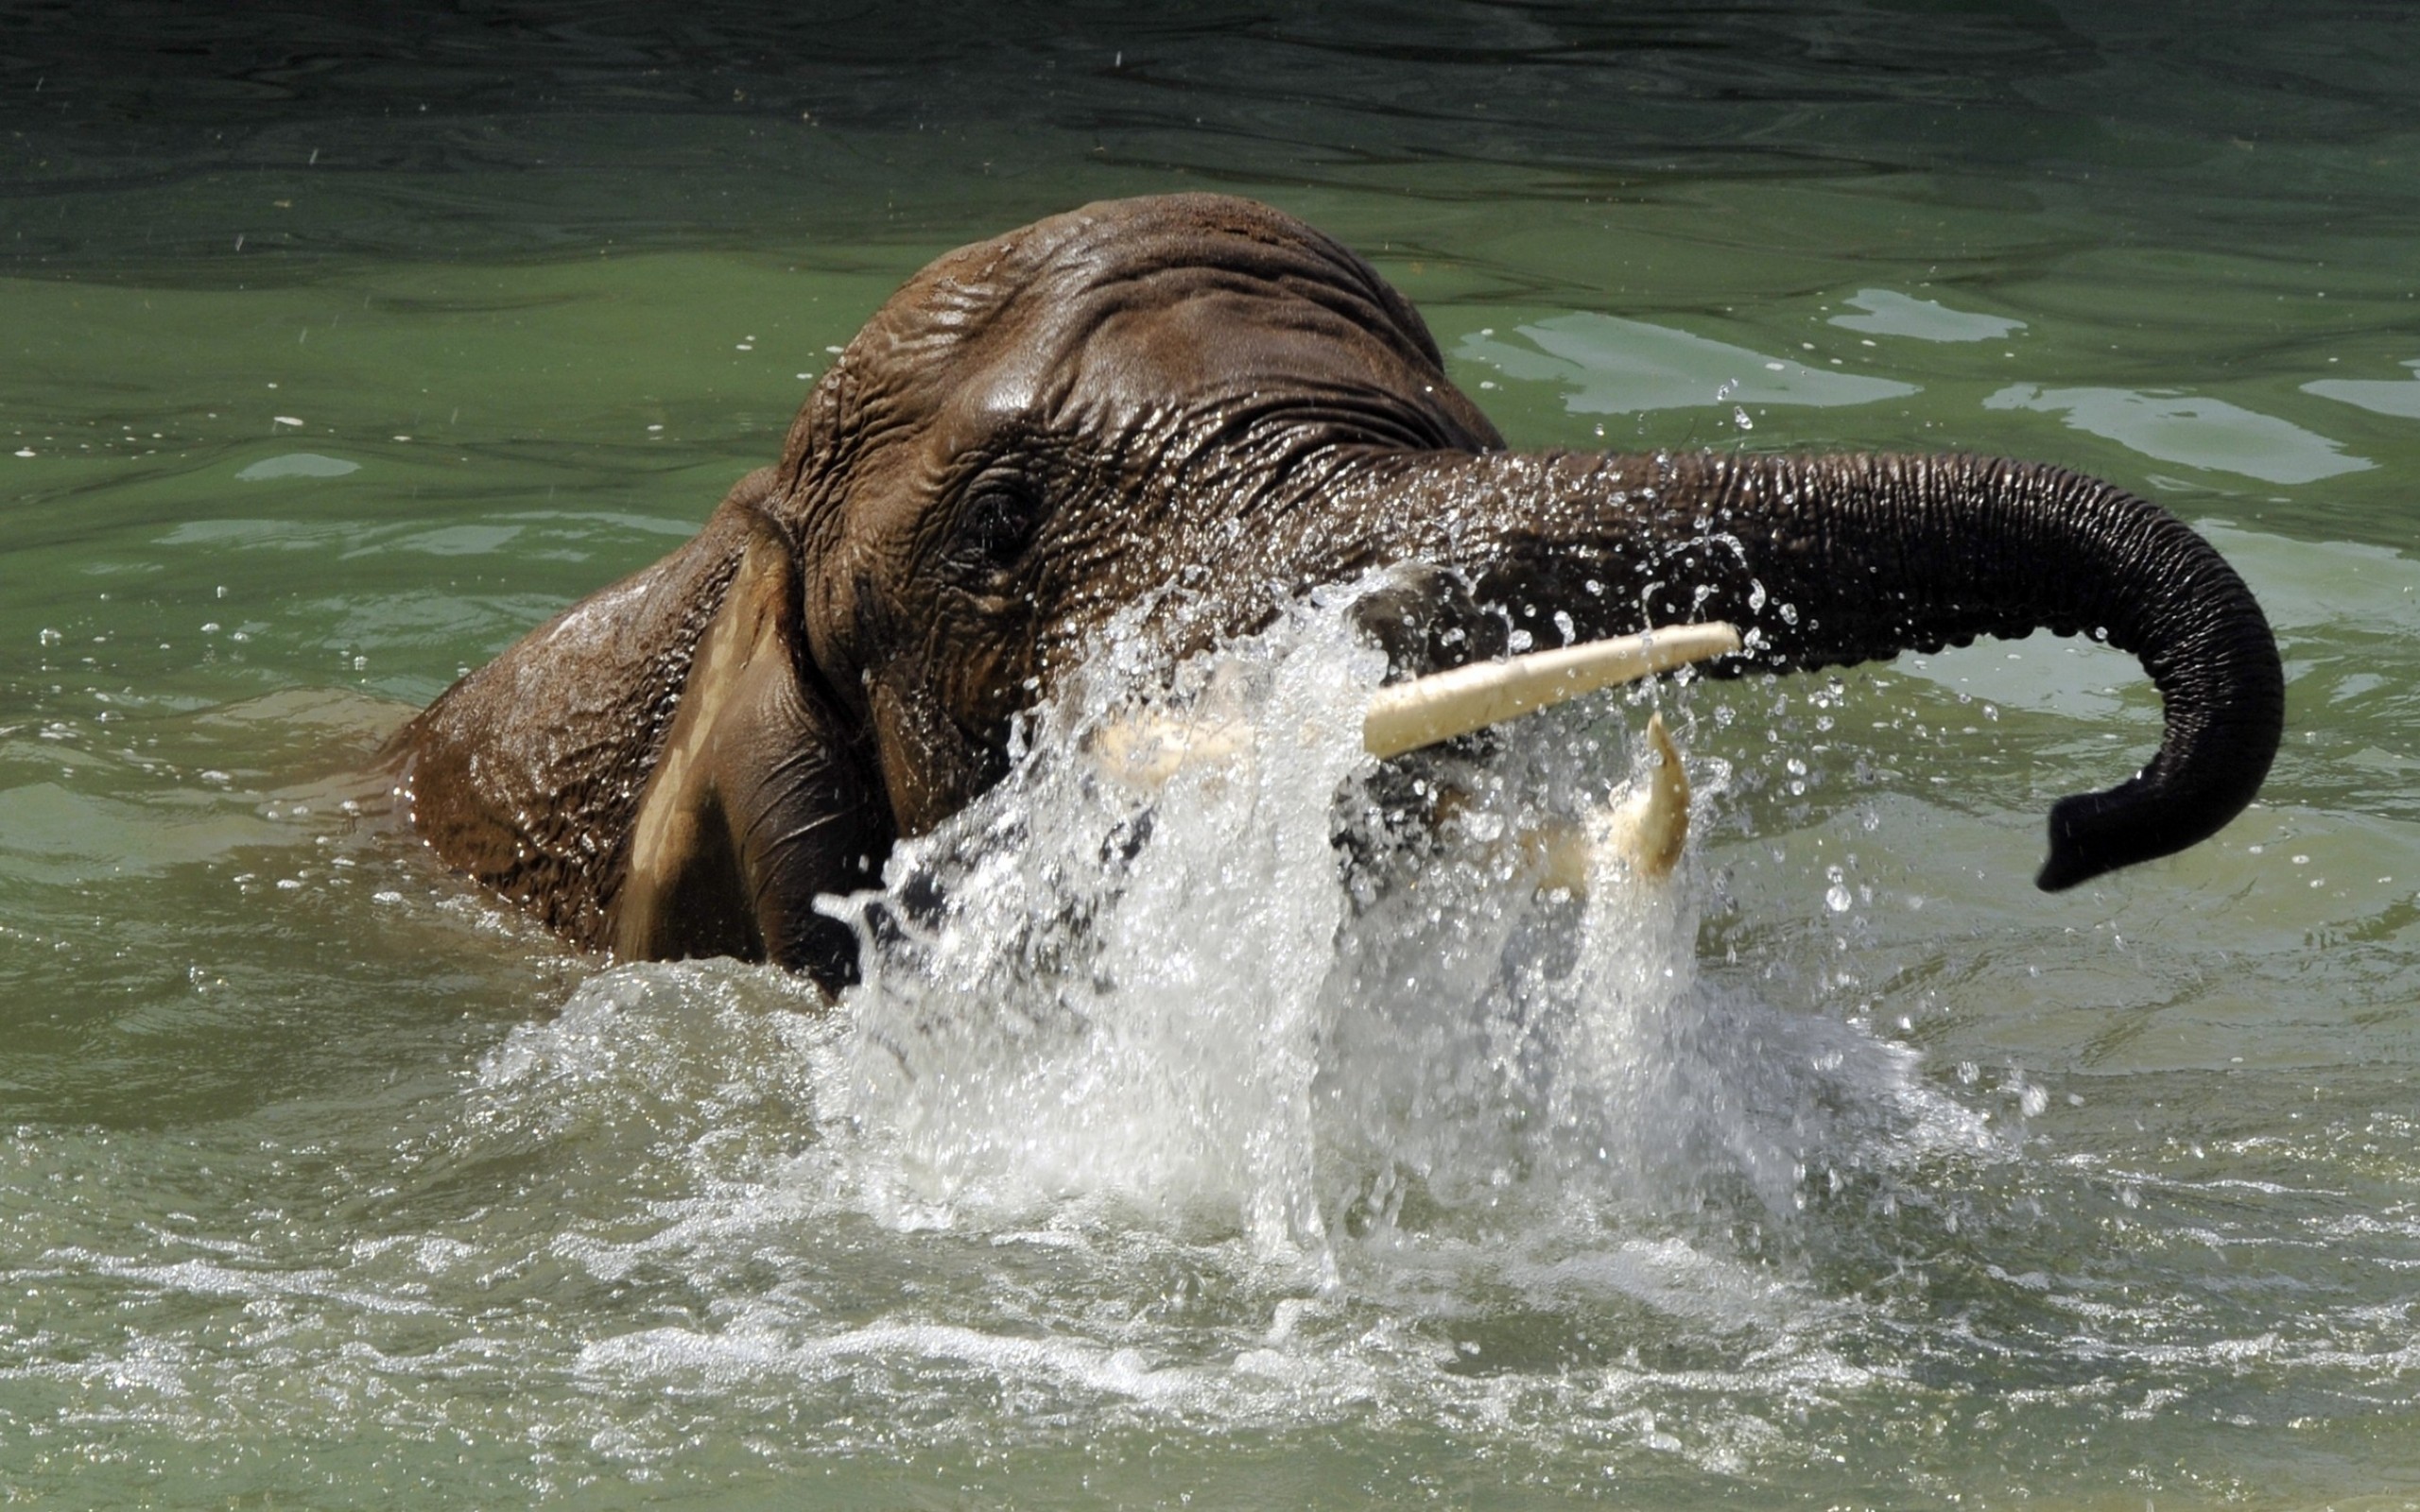 Elephant swimming in water wallpapers and images - wallpapers ...